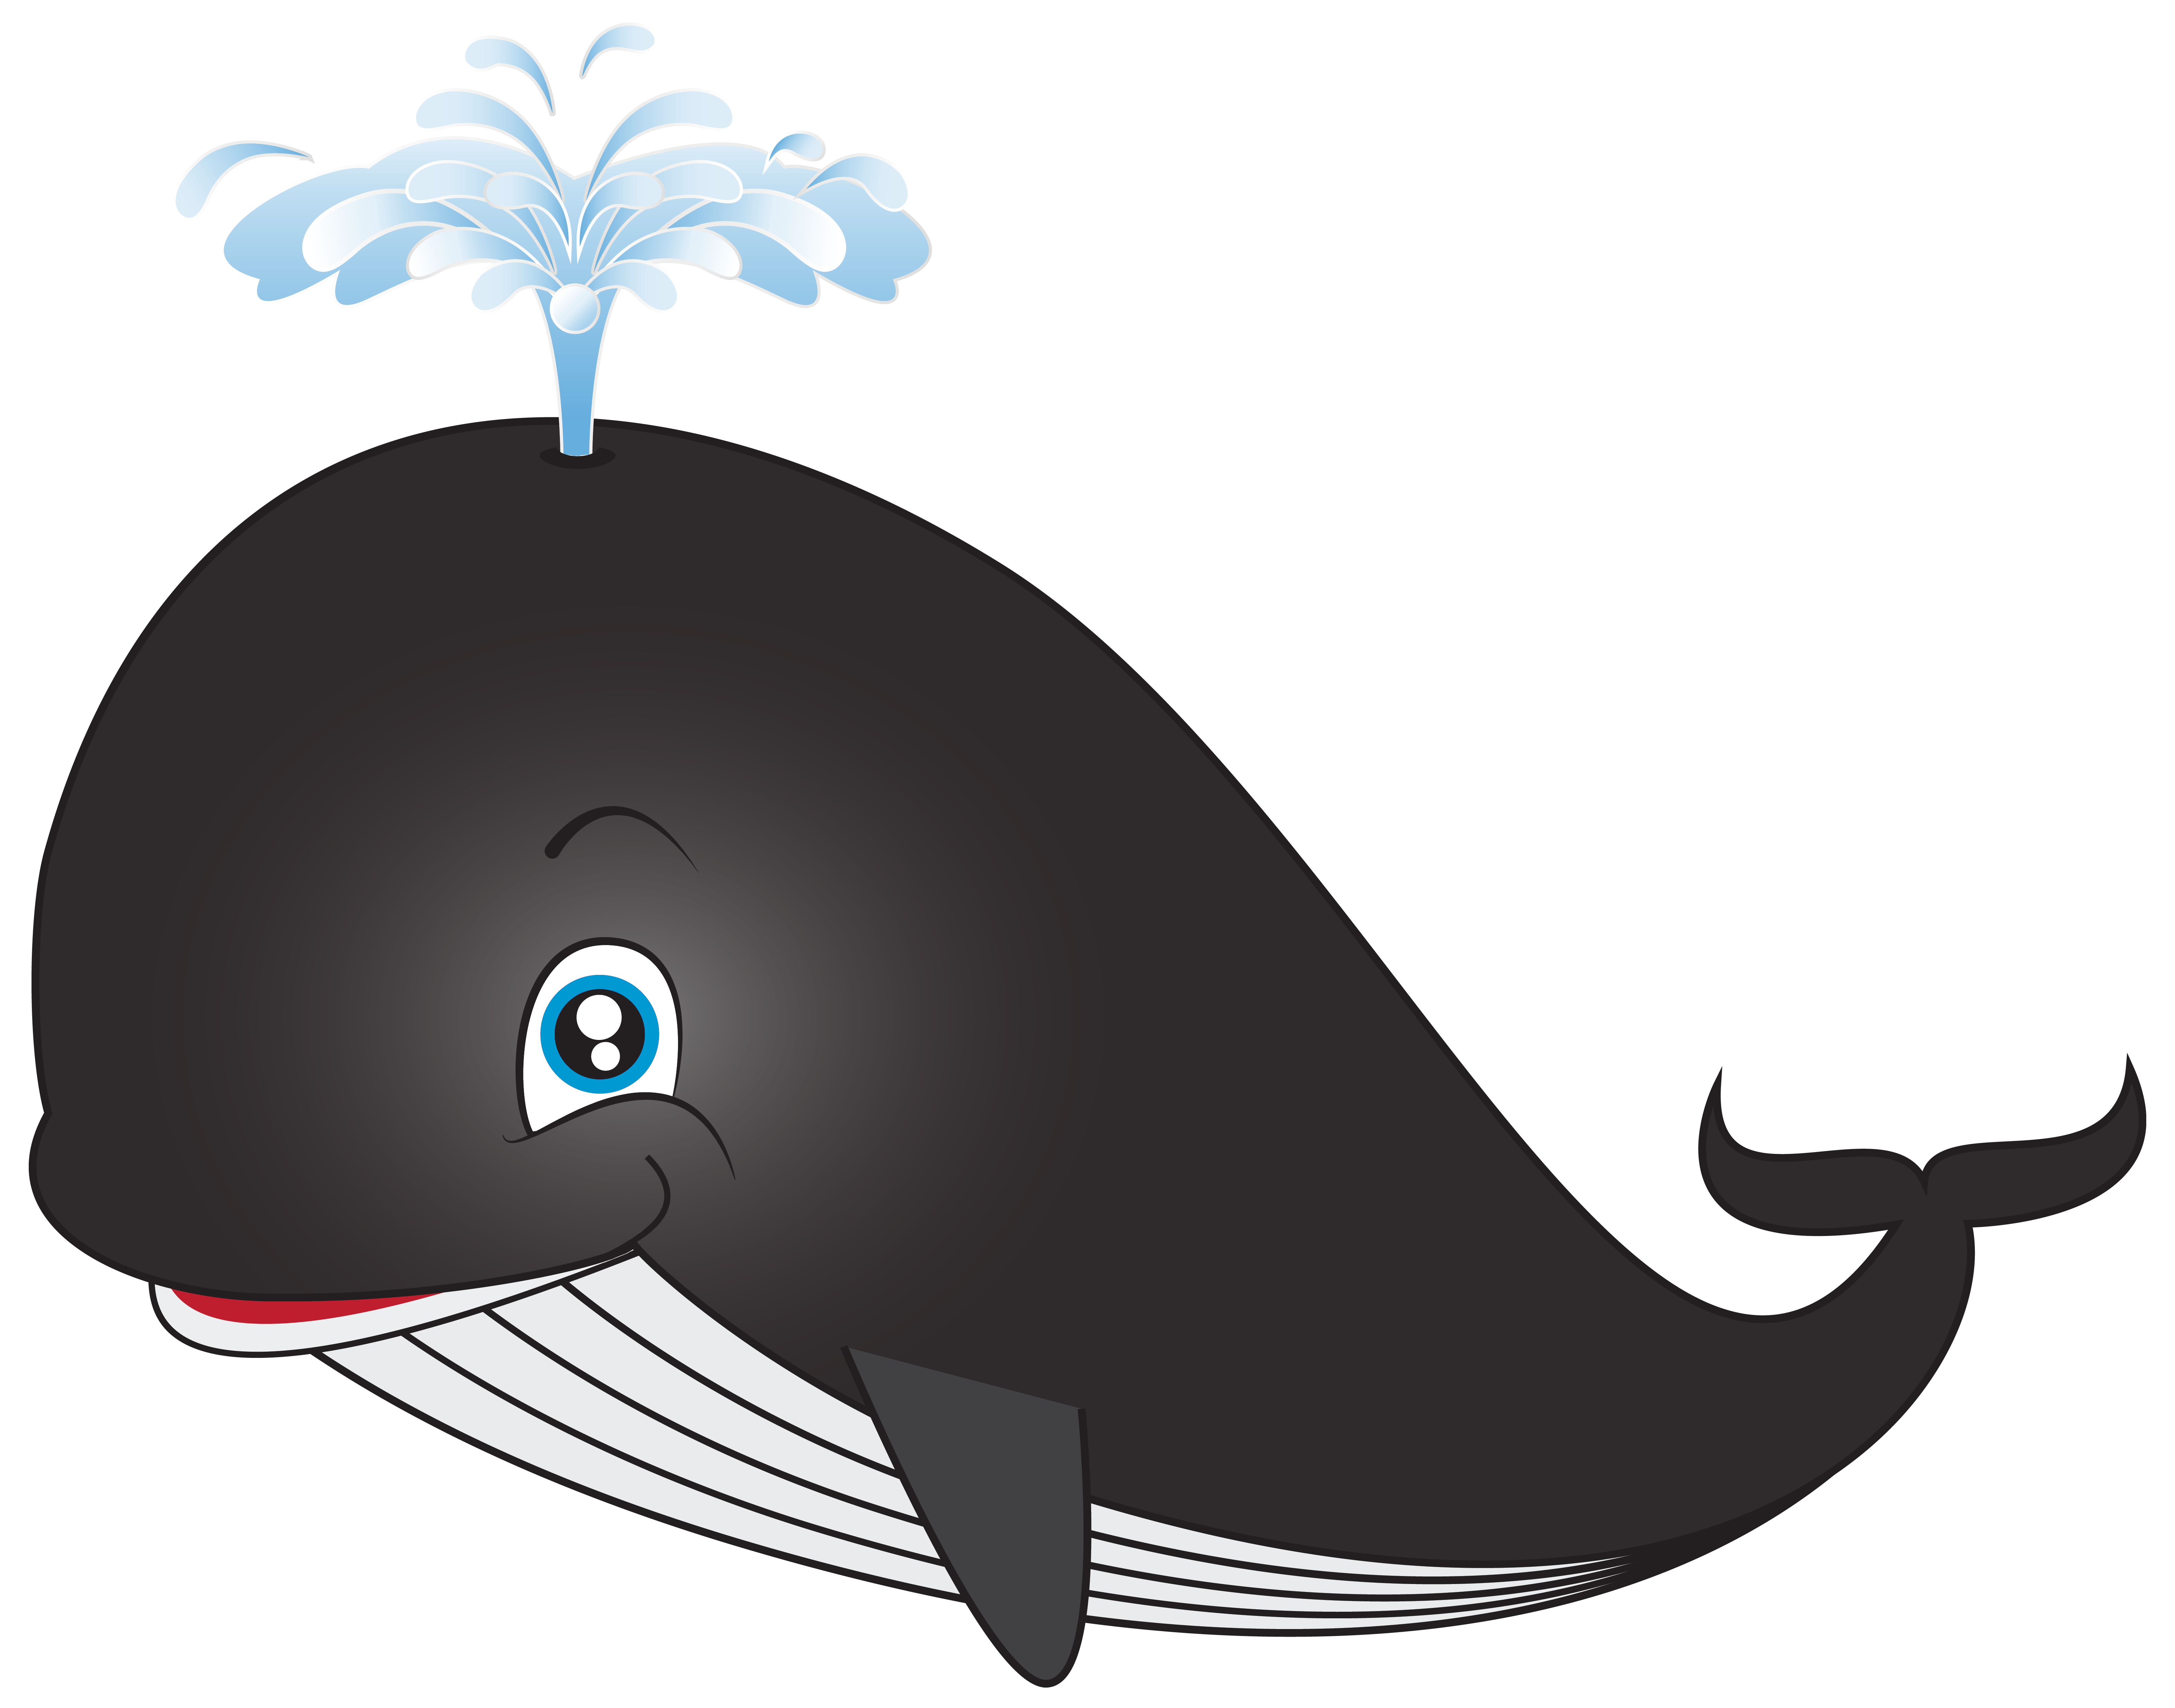 Whale clipart and illustration 2 whale clip art vector image 5 2